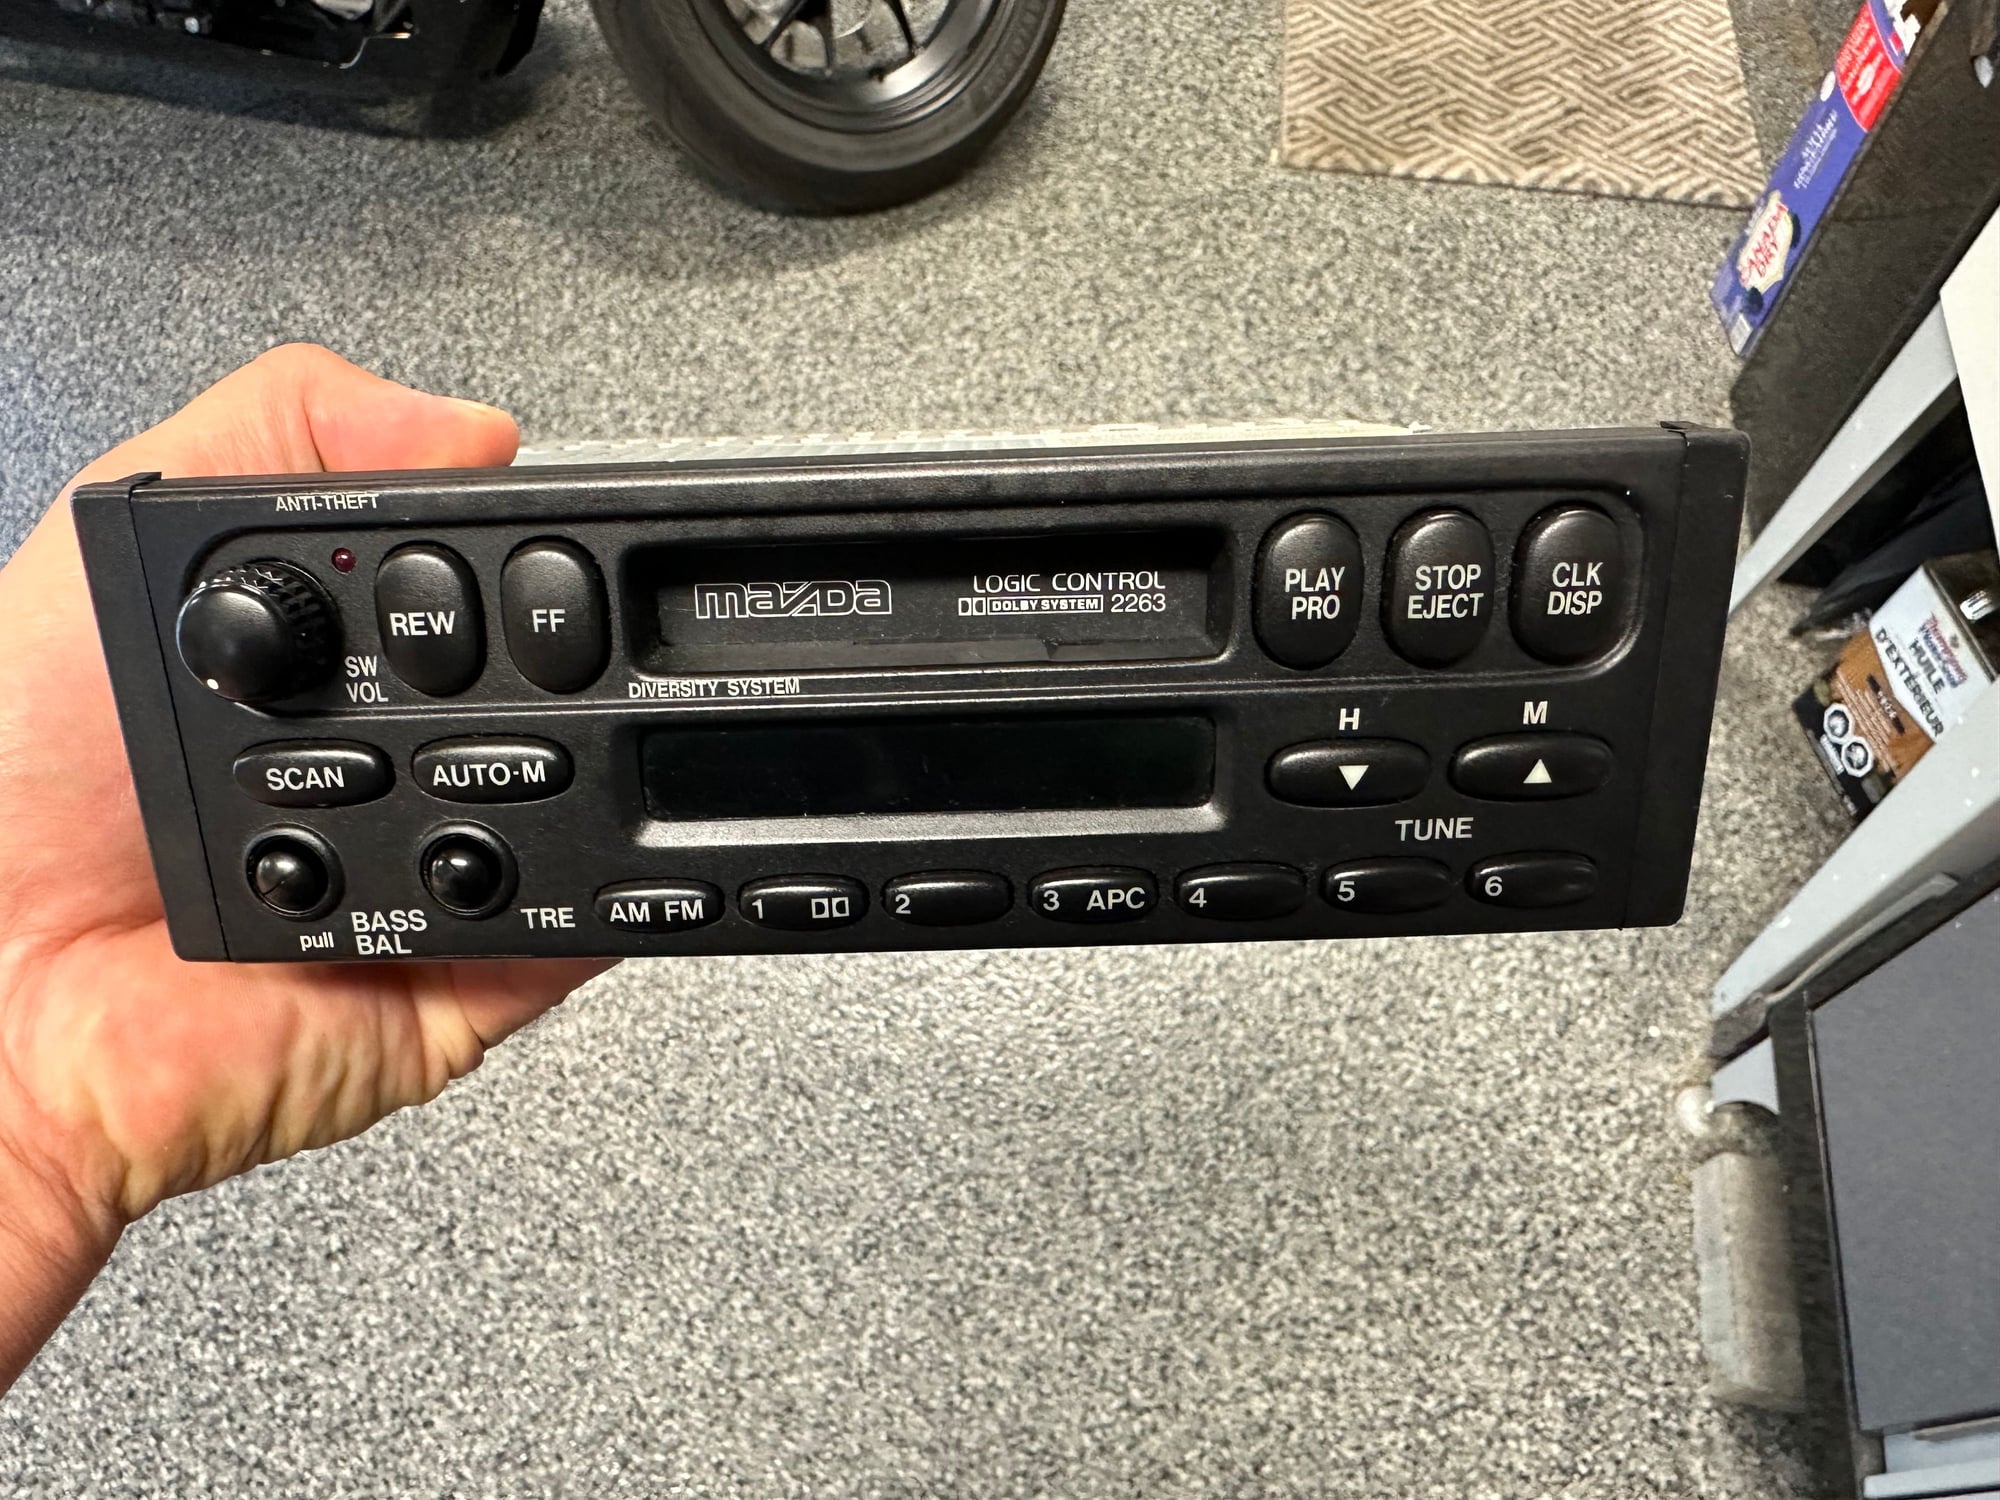 Audio Video/Electronics - FD Rx-7 NON-Bose head unit/CD player - Used - 1993 to 2001 Mazda RX-7 - Beaconsfield, QC H9W1A3, Canada